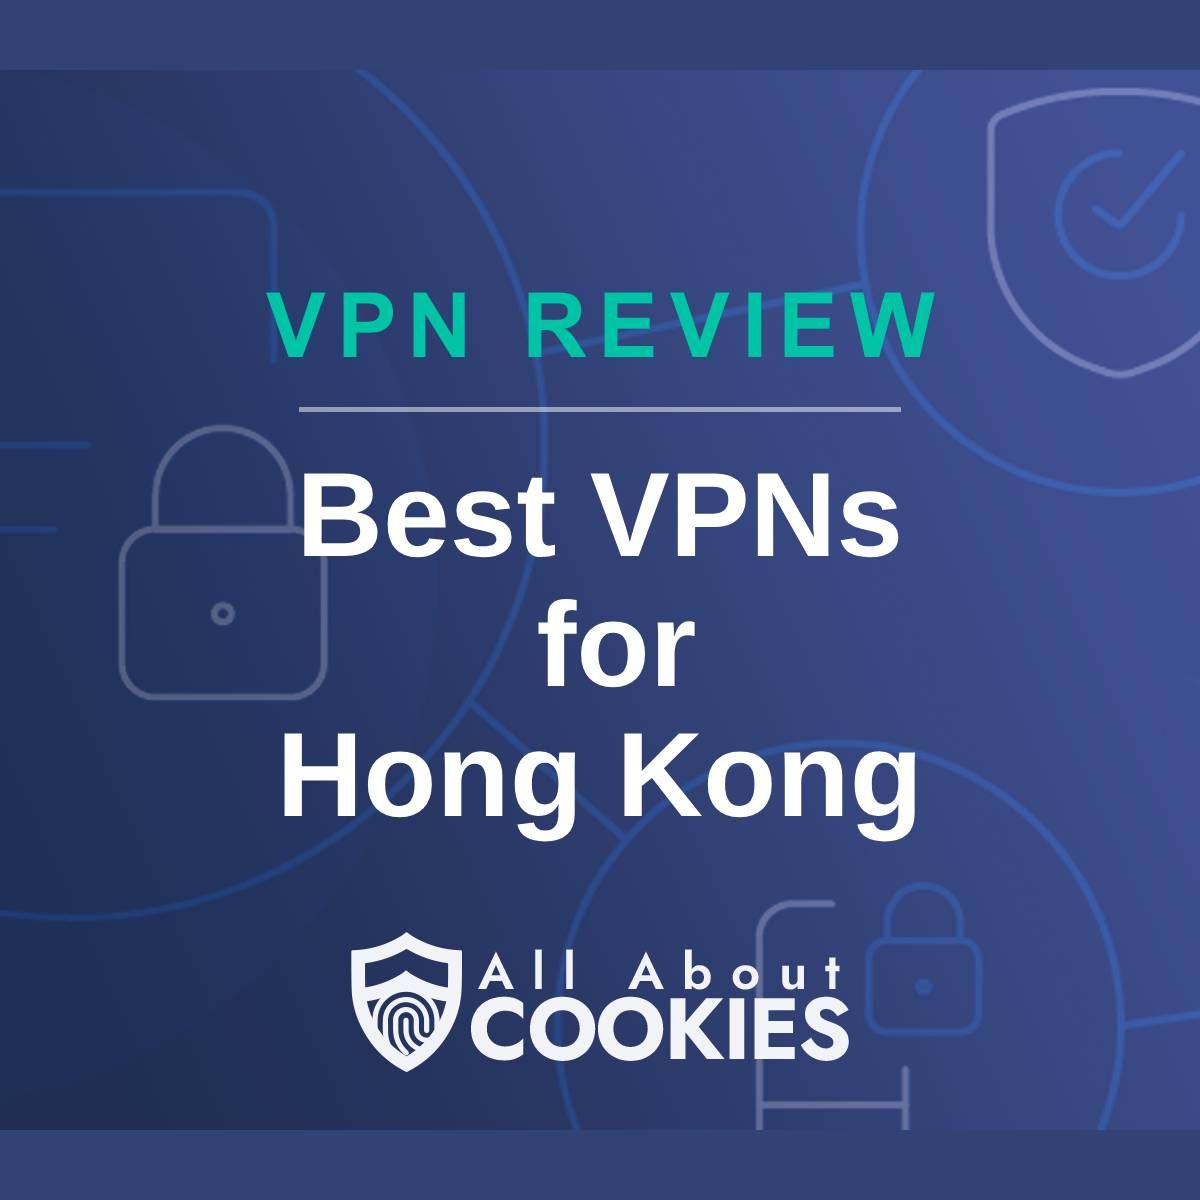 A blue background with images of locks and shields with the text &quot;VPN Review Best VPNs for Hong Kong&quot; and the All About Cookies logo. 